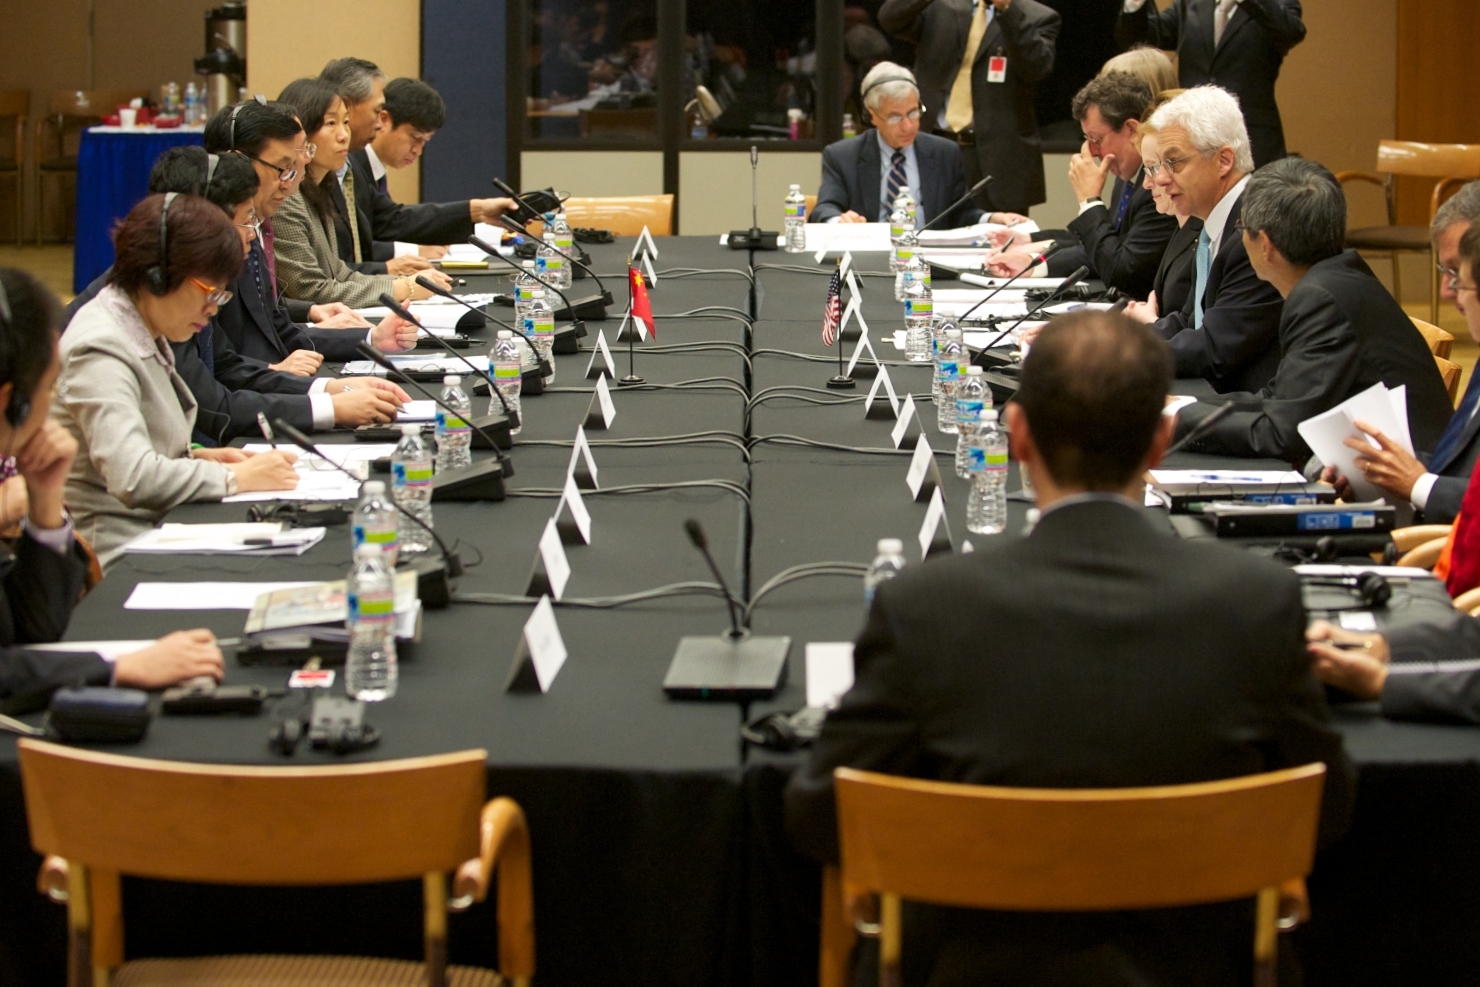 U.S. and Chinese officials at the high level joint dialogue between competition agencies in Washington, D.C.